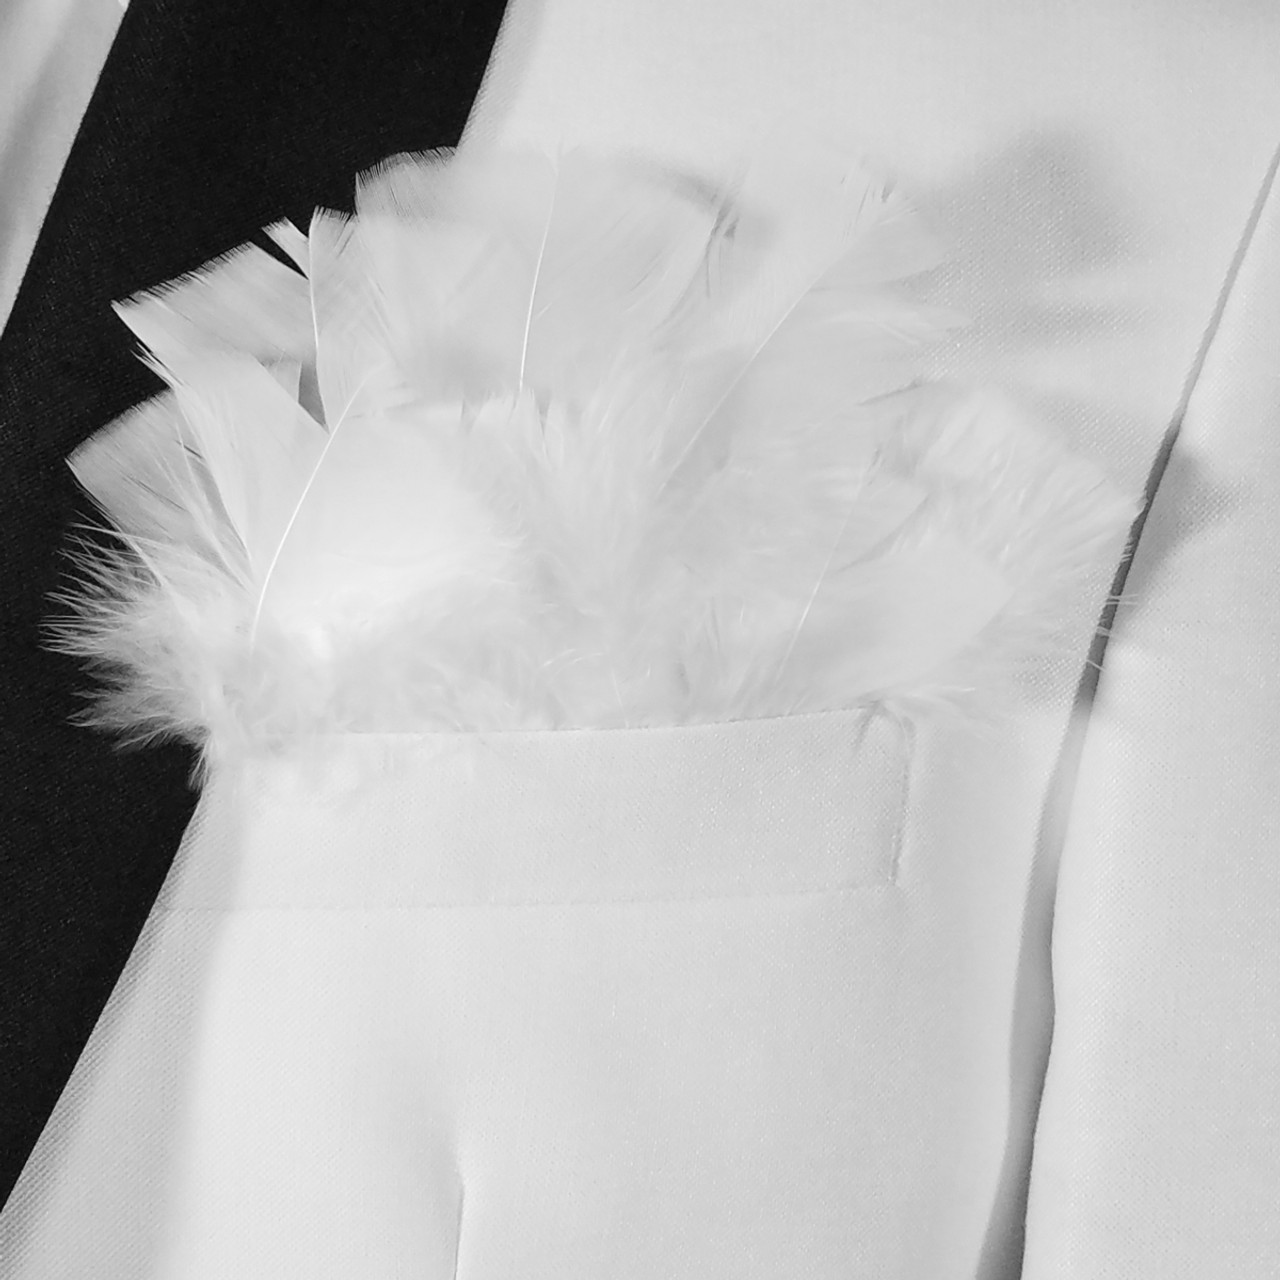 Genuine Feathers Pocket Square Insert